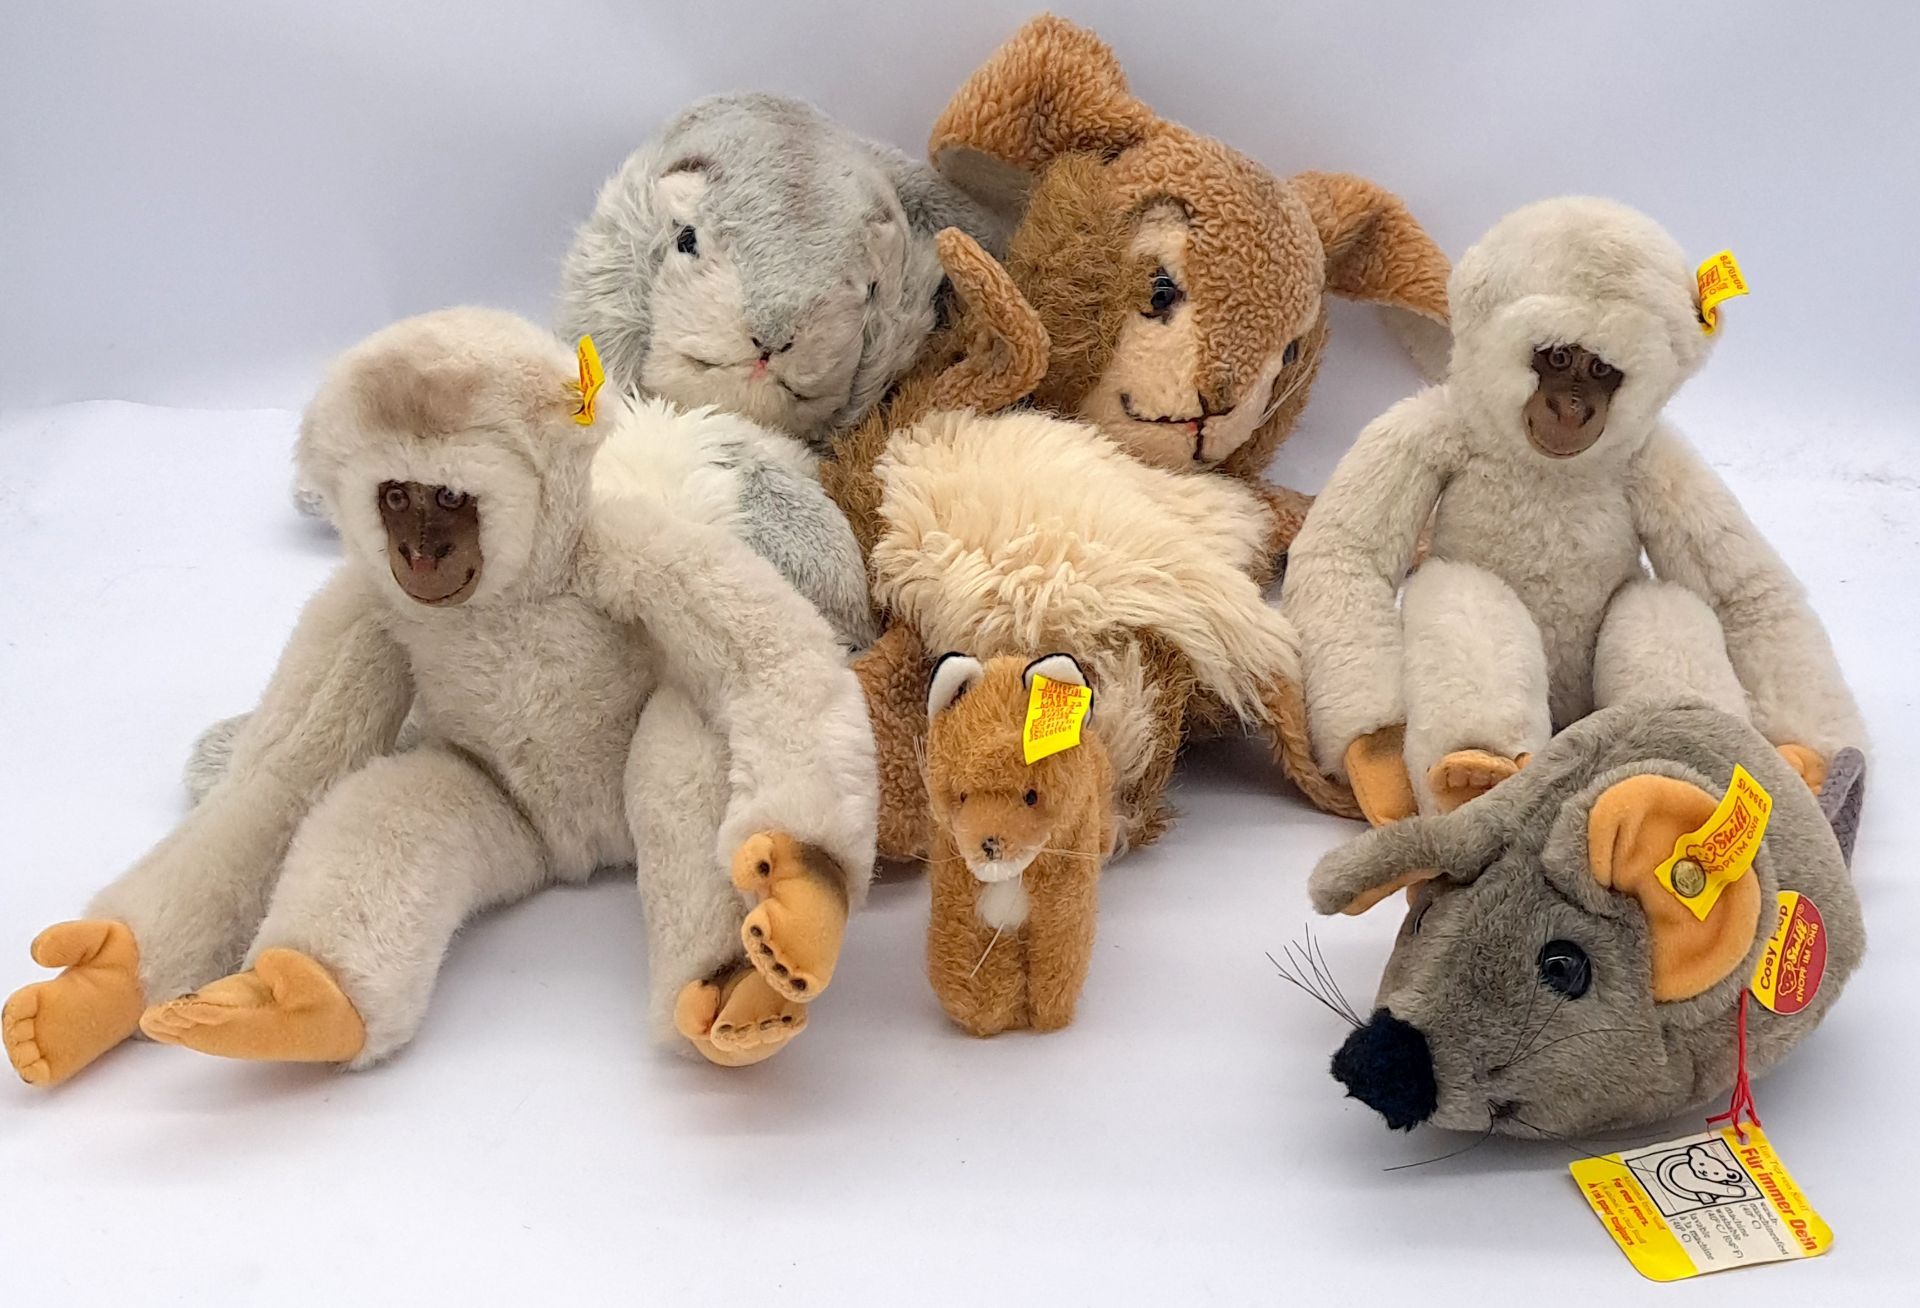 Steiff collection of plush animals, including Jolly Hase hand puppets